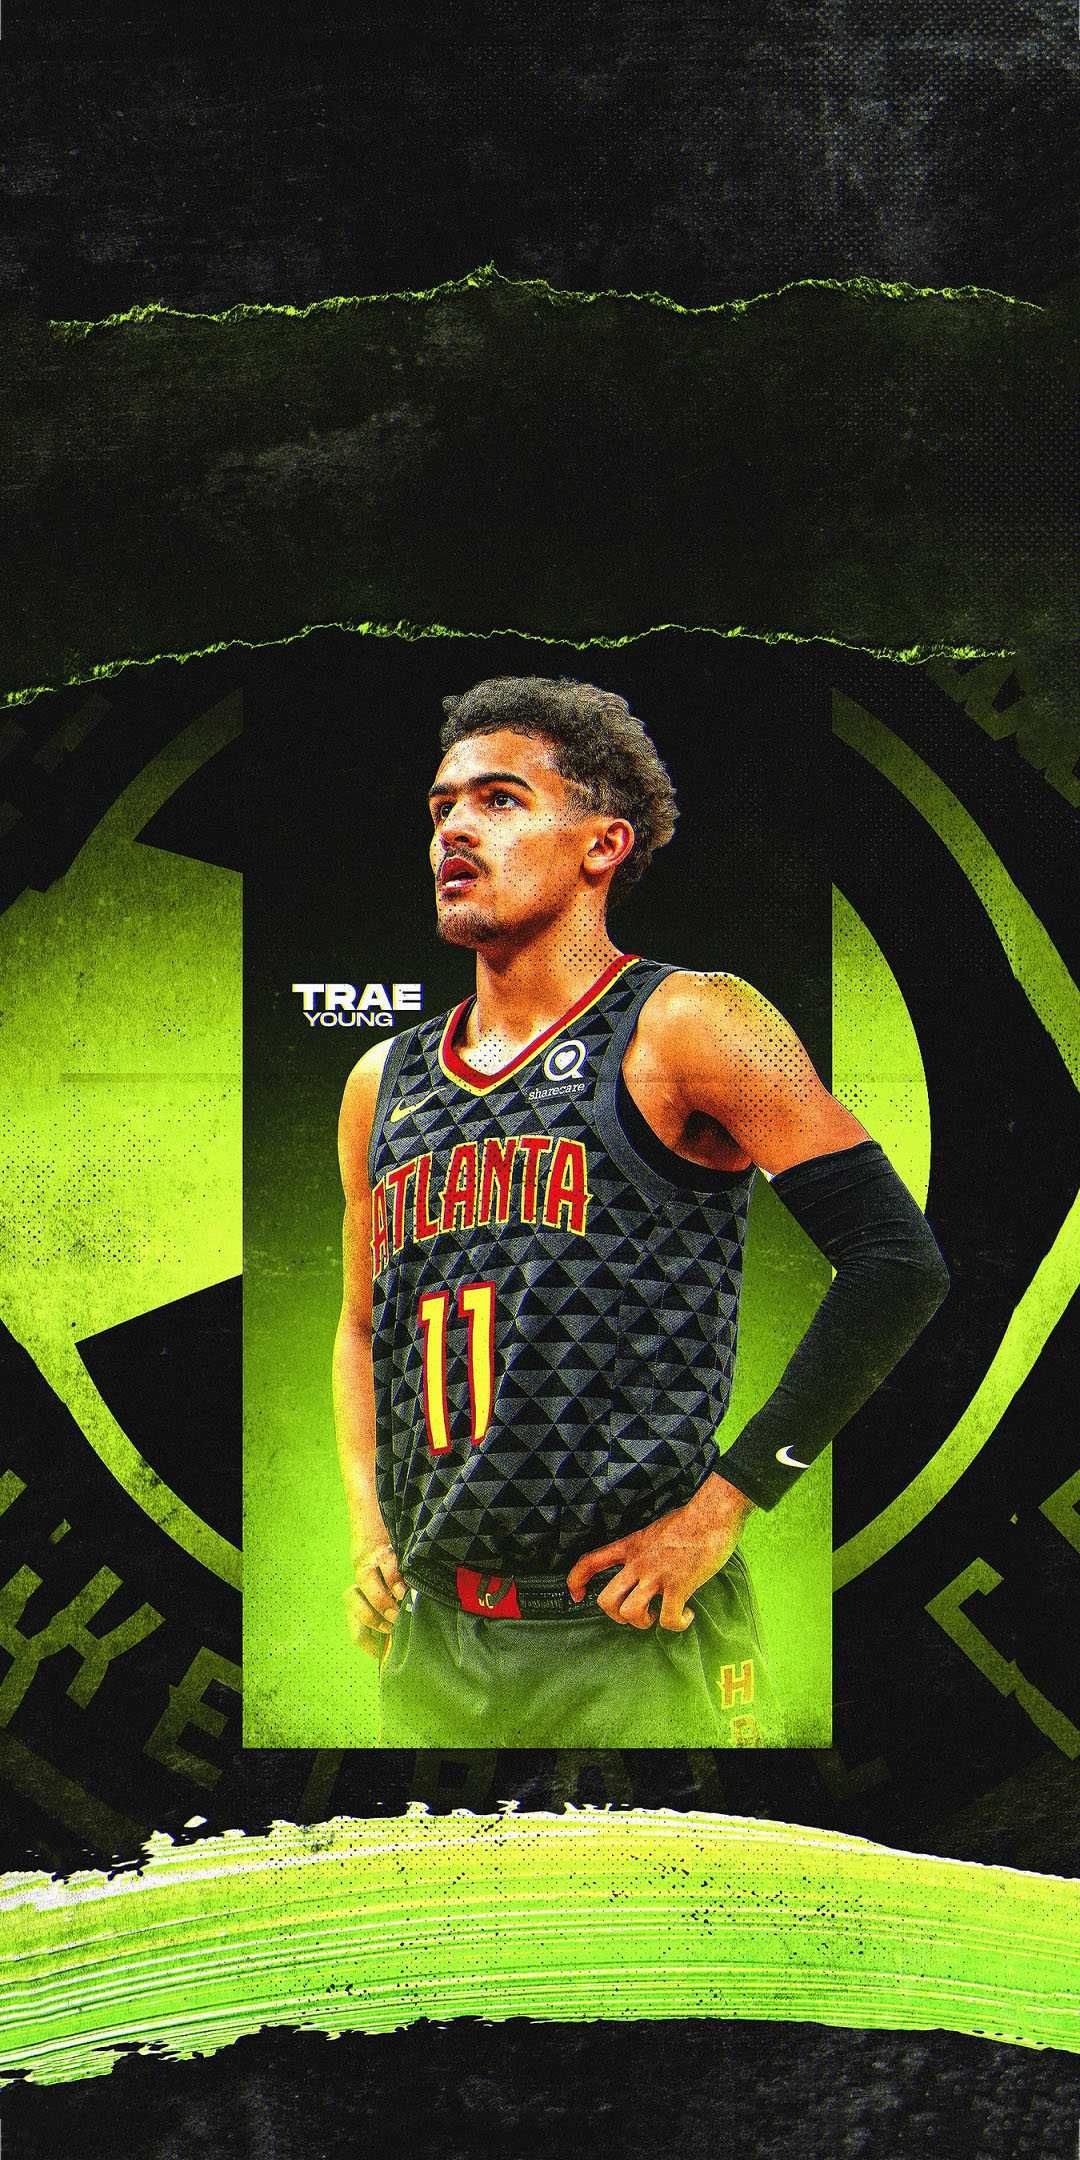 Trae young wallpaper by banyo77 - Download on ZEDGE™